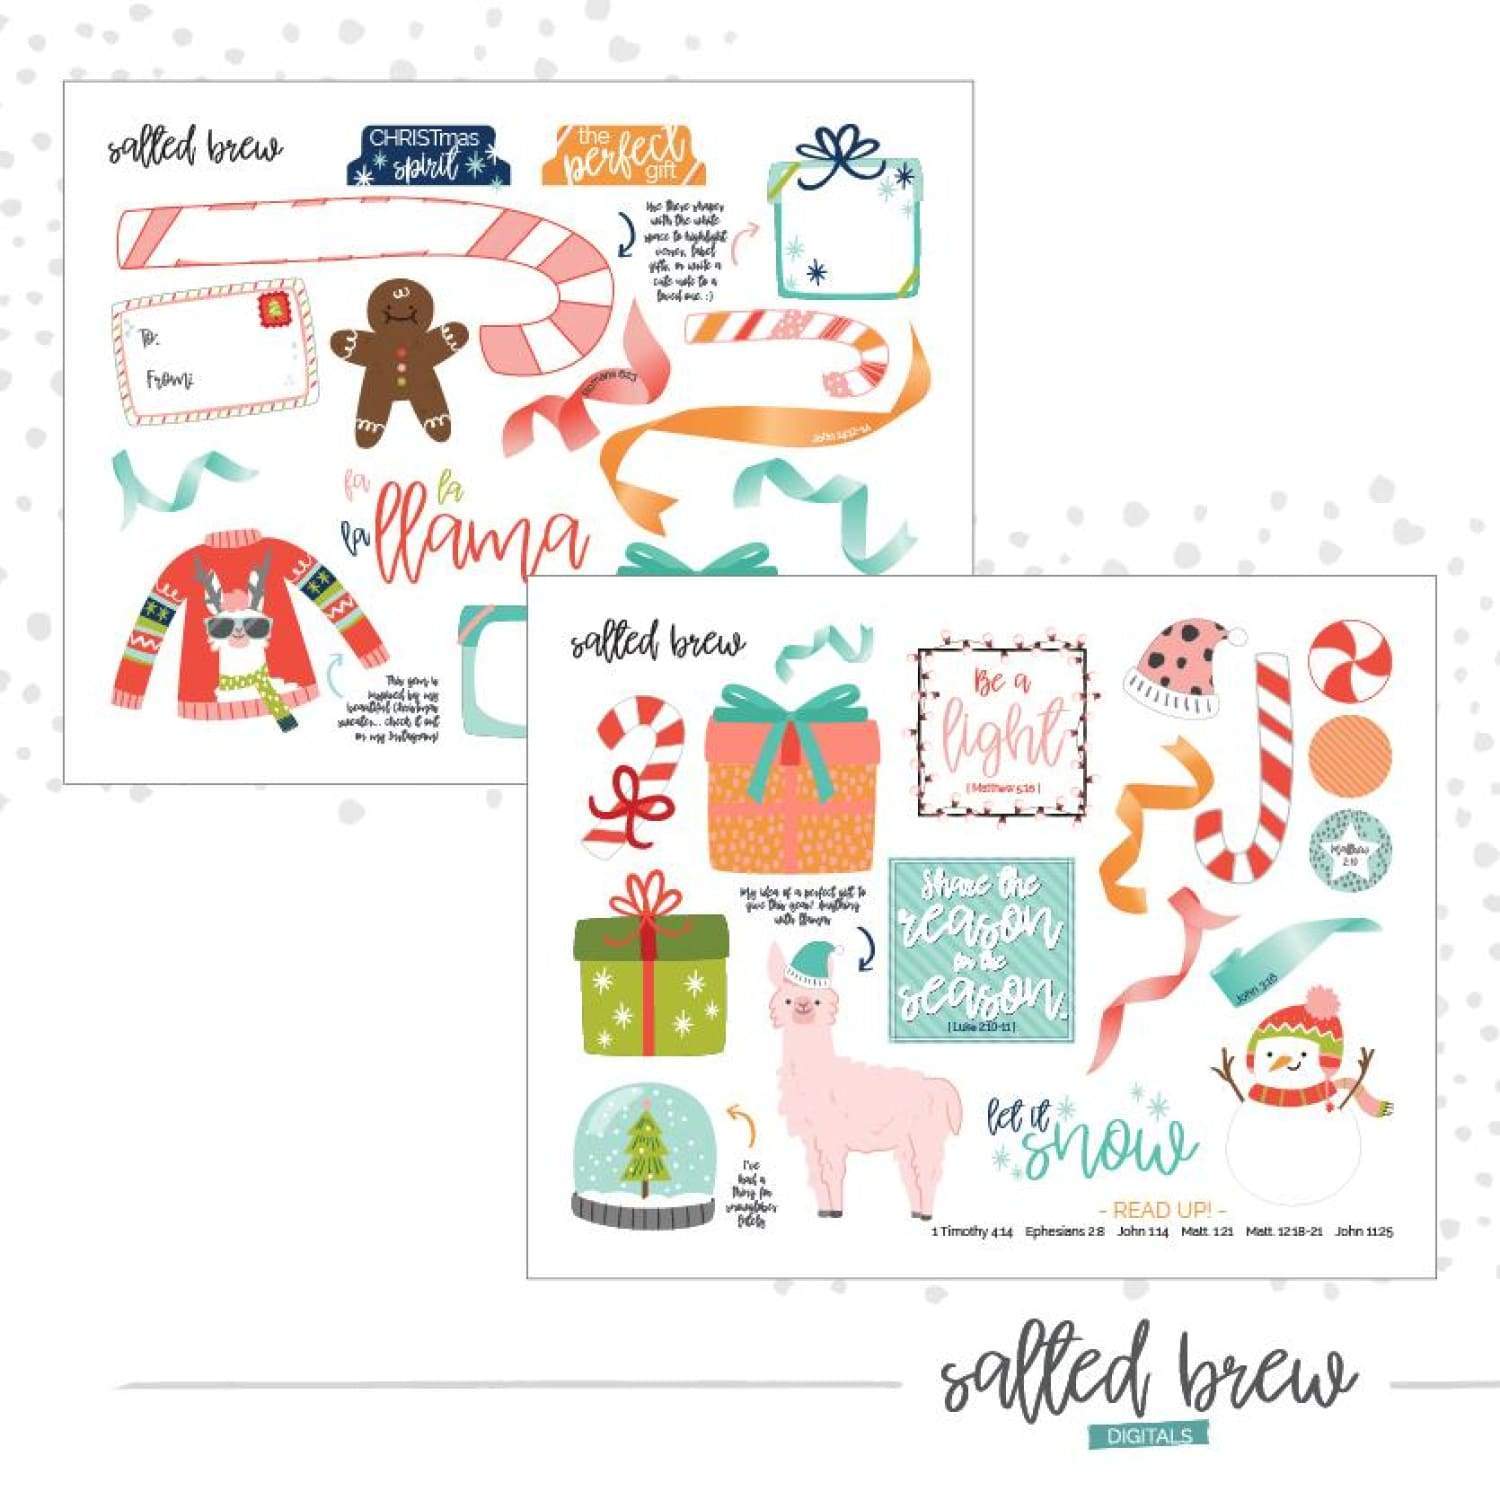 https://cdn.shopify.com/s/files/1/2432/1829/products/the-perfect-gift-bible-journaling-digital-download-christmas-end-of-season-sale-kits-winter-digitals-salted-brew-572.jpg